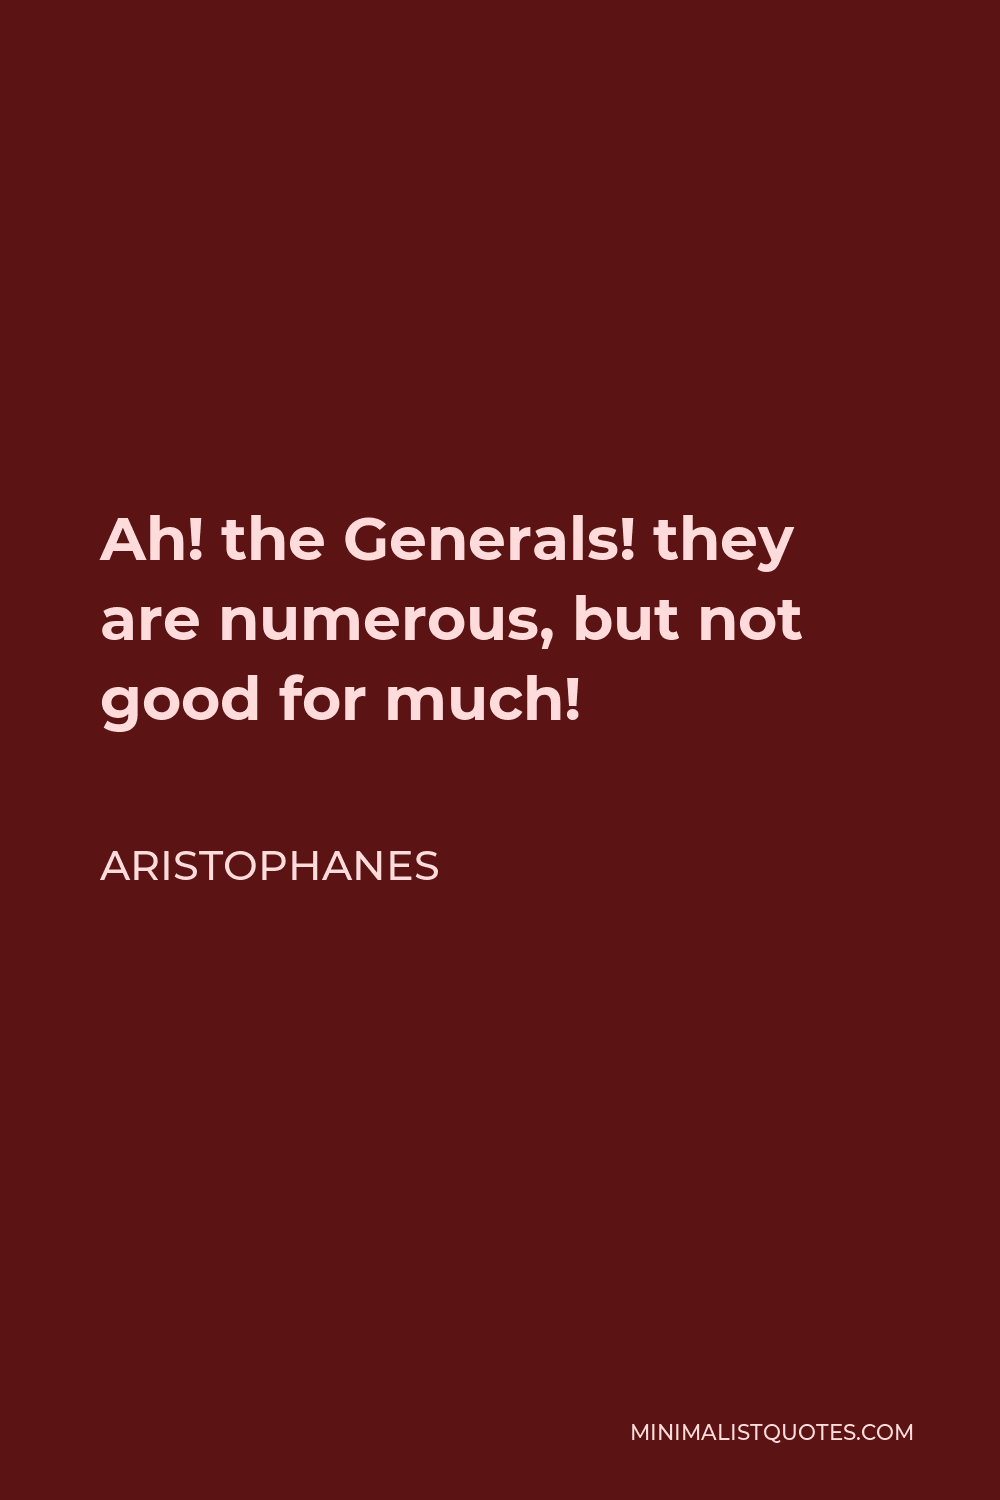 Aristophanes Quote - Ah! the Generals! they are numerous, but not good for much!